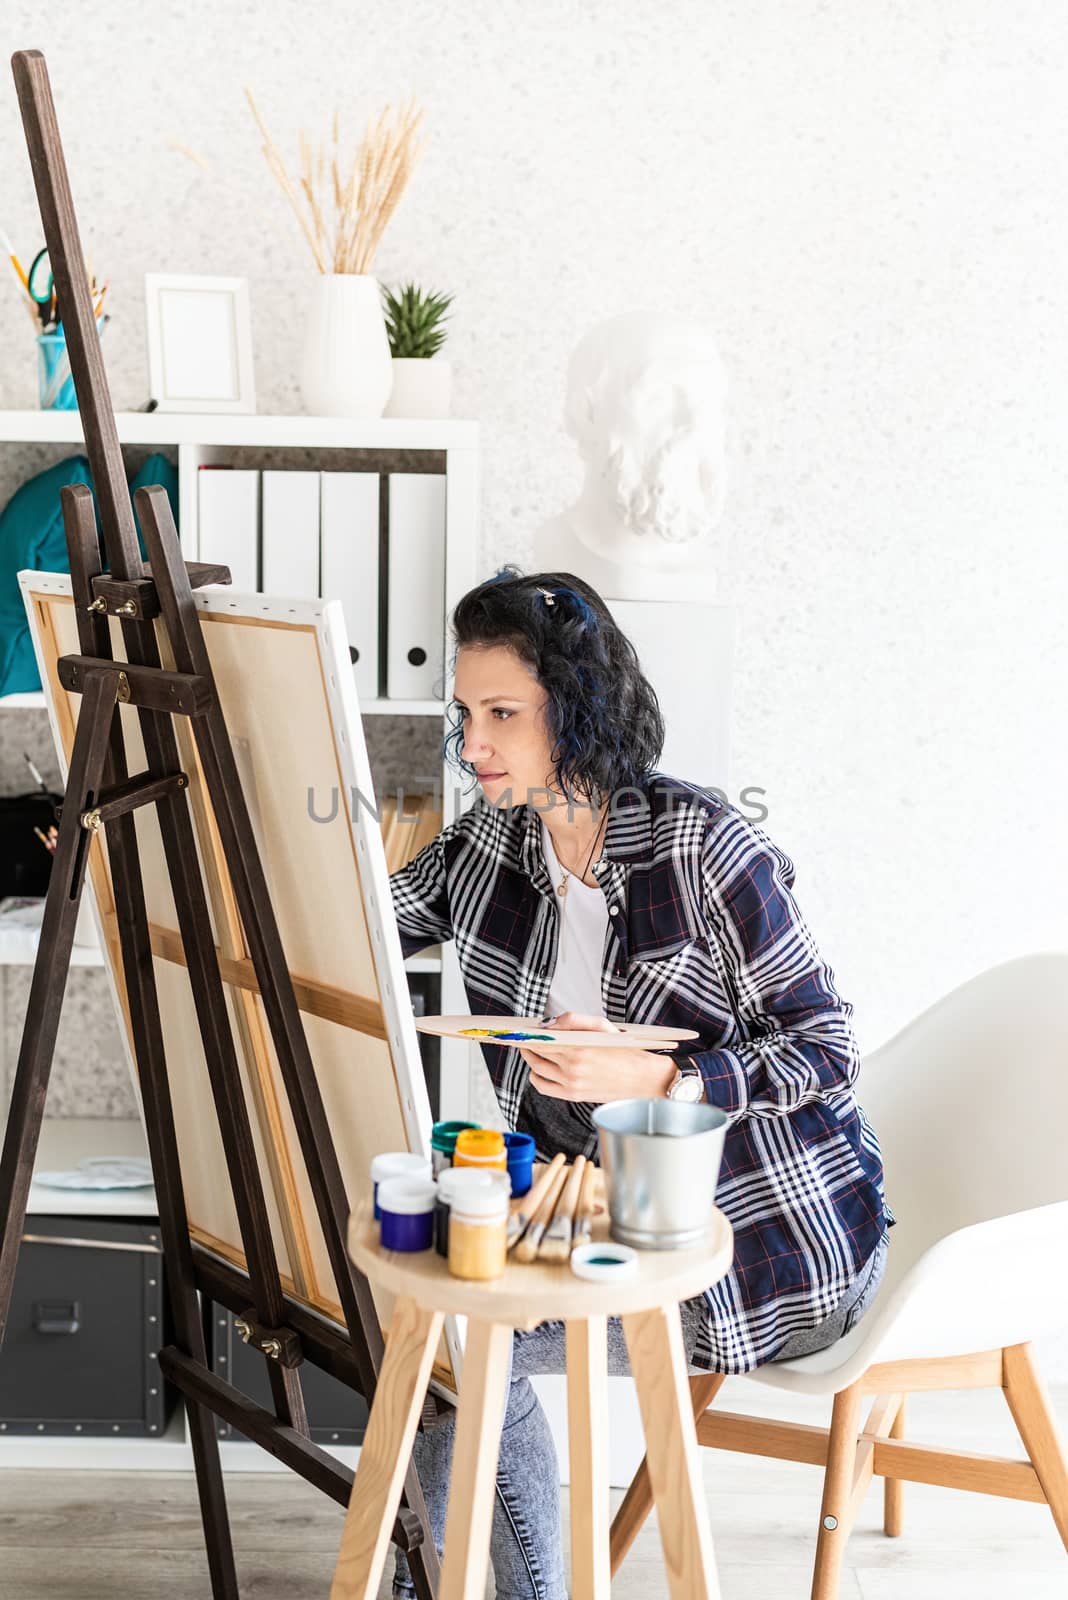 Creative woman with blue dyed hair painting in her studio by Desperada